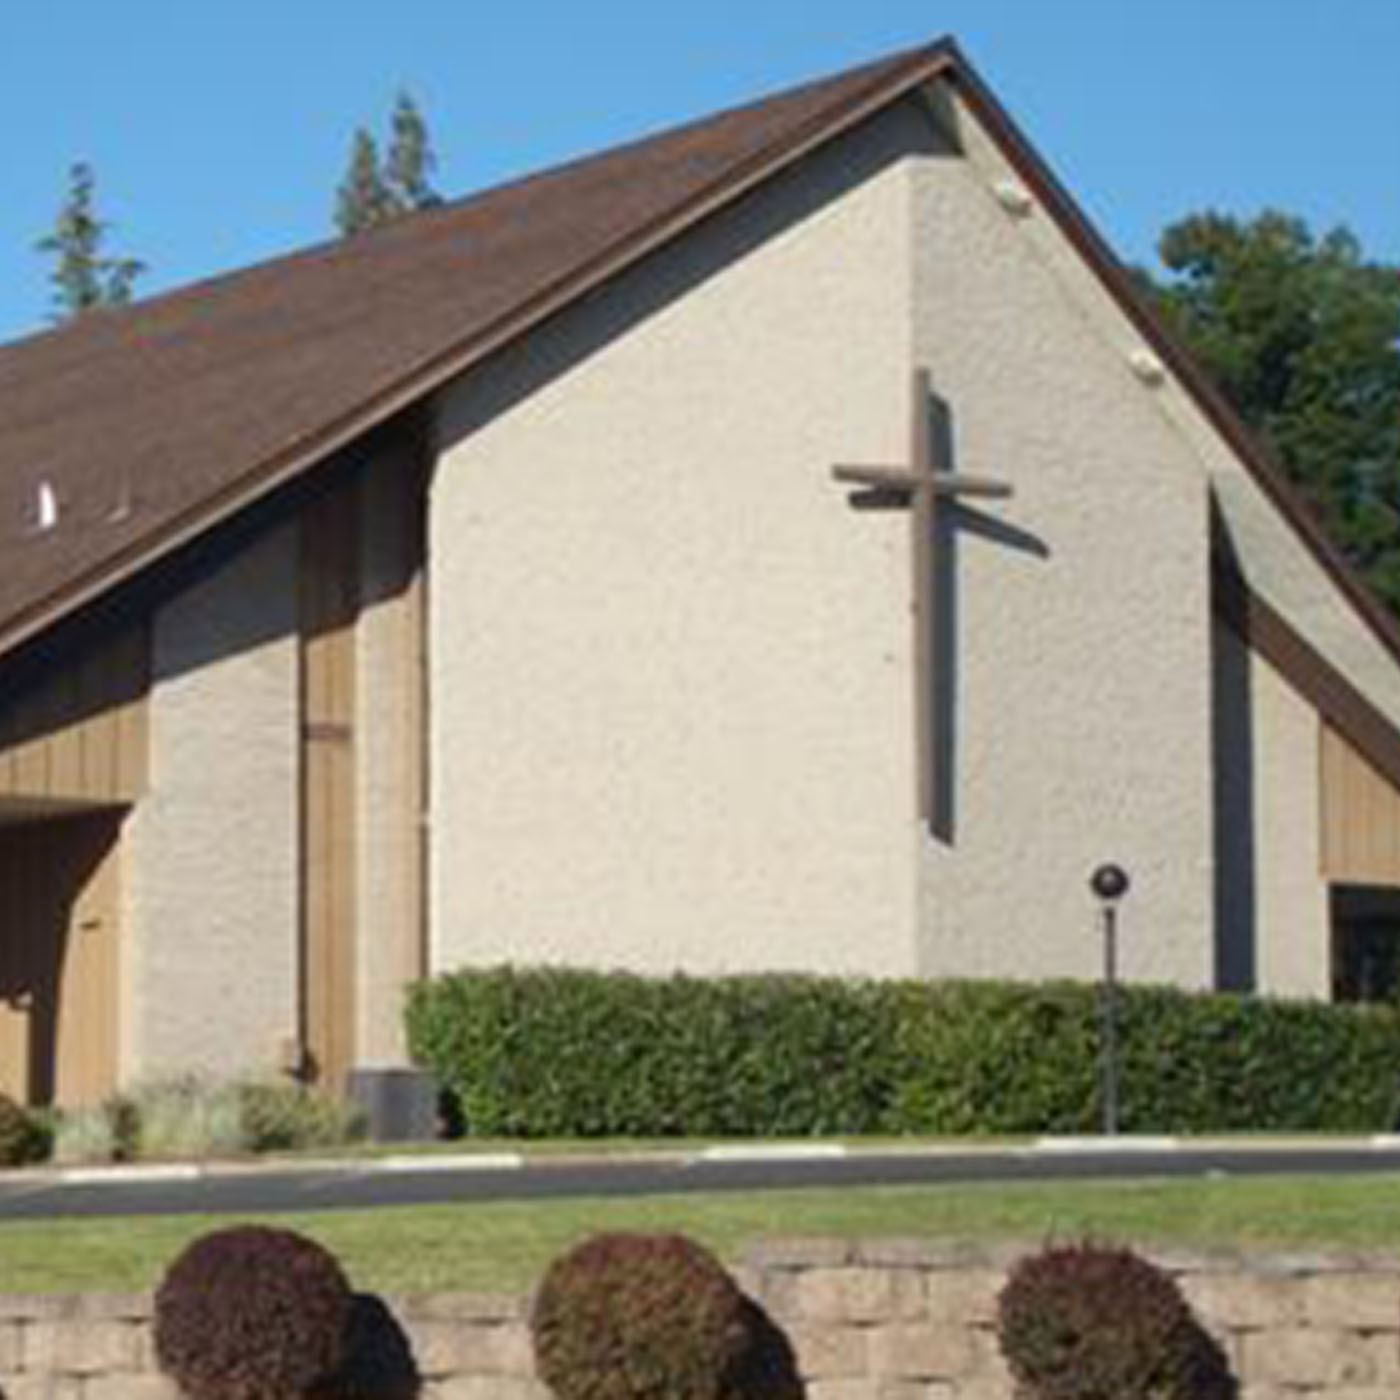 St. Mark's Lutheran Church and School (WELS, Citrus Heights, CA)